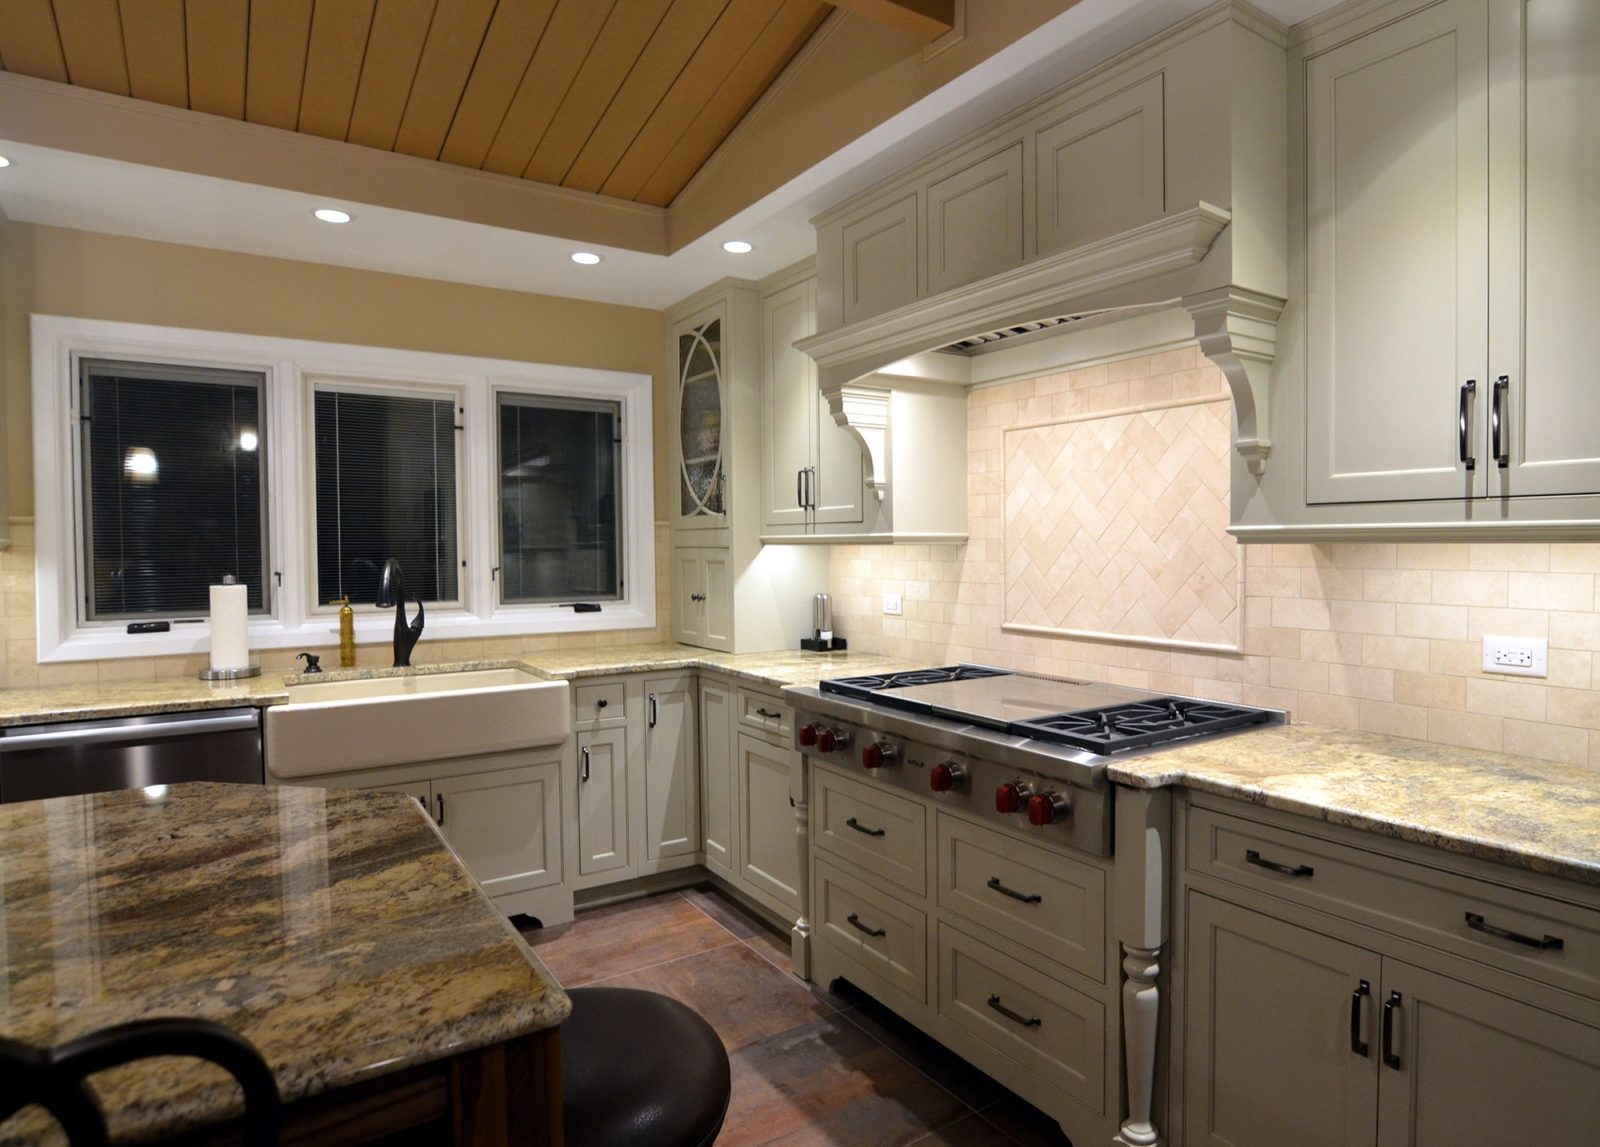 Kitchen with cabinets, drawers, sink, appliances, windows, polished stone kitchen table with chairs